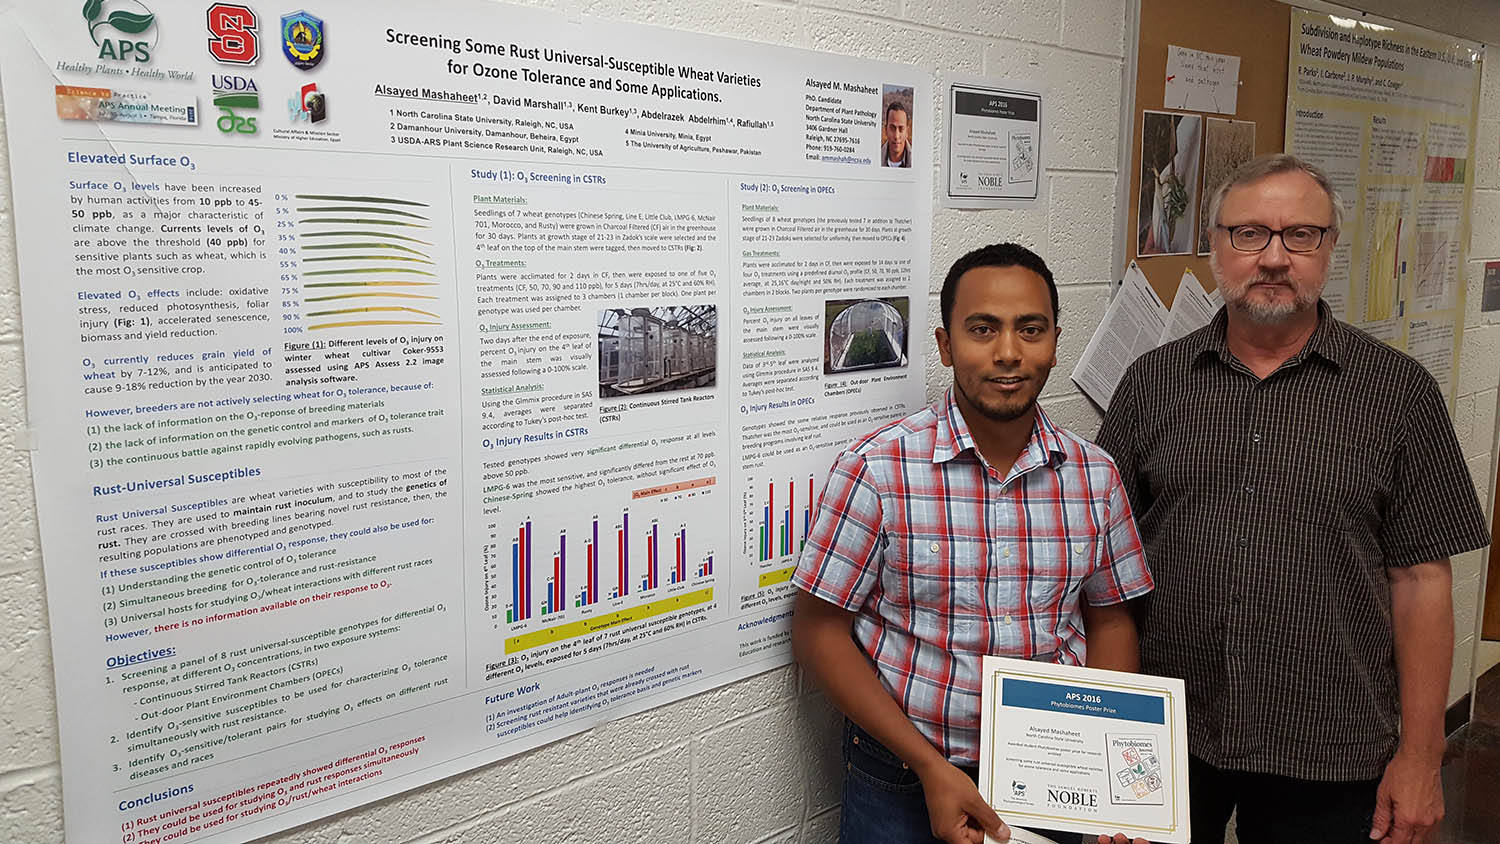 Alsayed M. Mashaheet and mentor pose with research poster and award